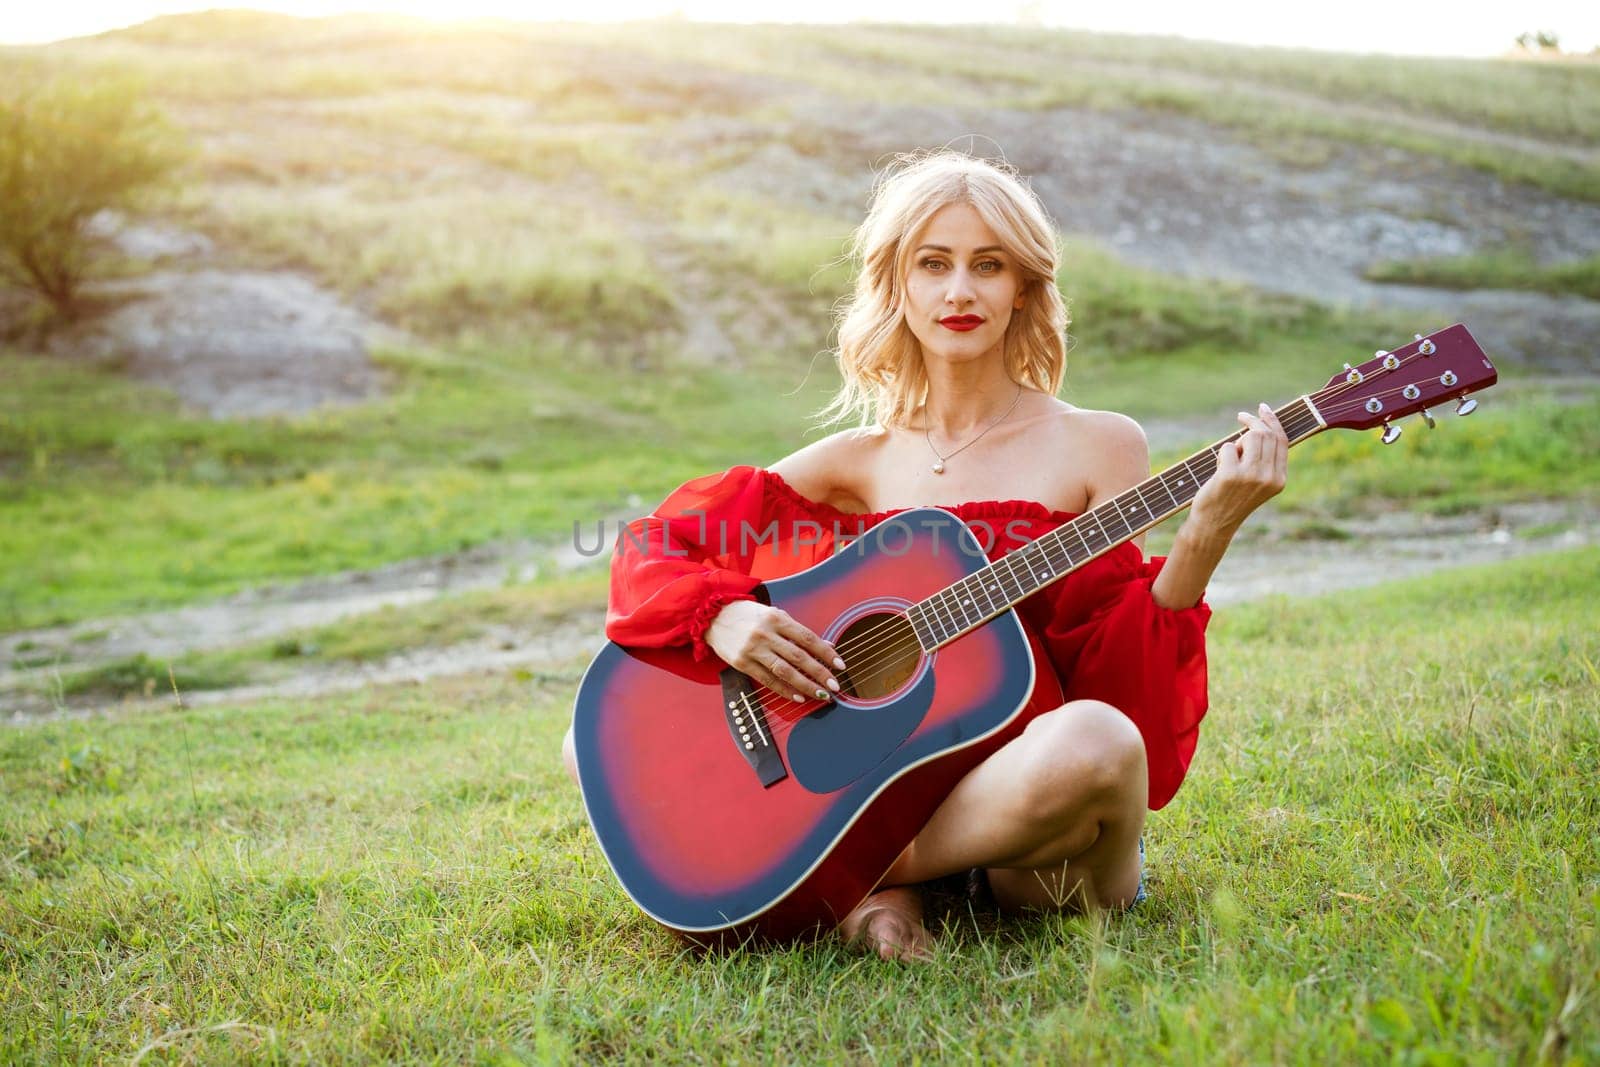 Woman in red grass with a red guitar. Girl musician plays the guitar outdoors. Blonde caucasian appearance